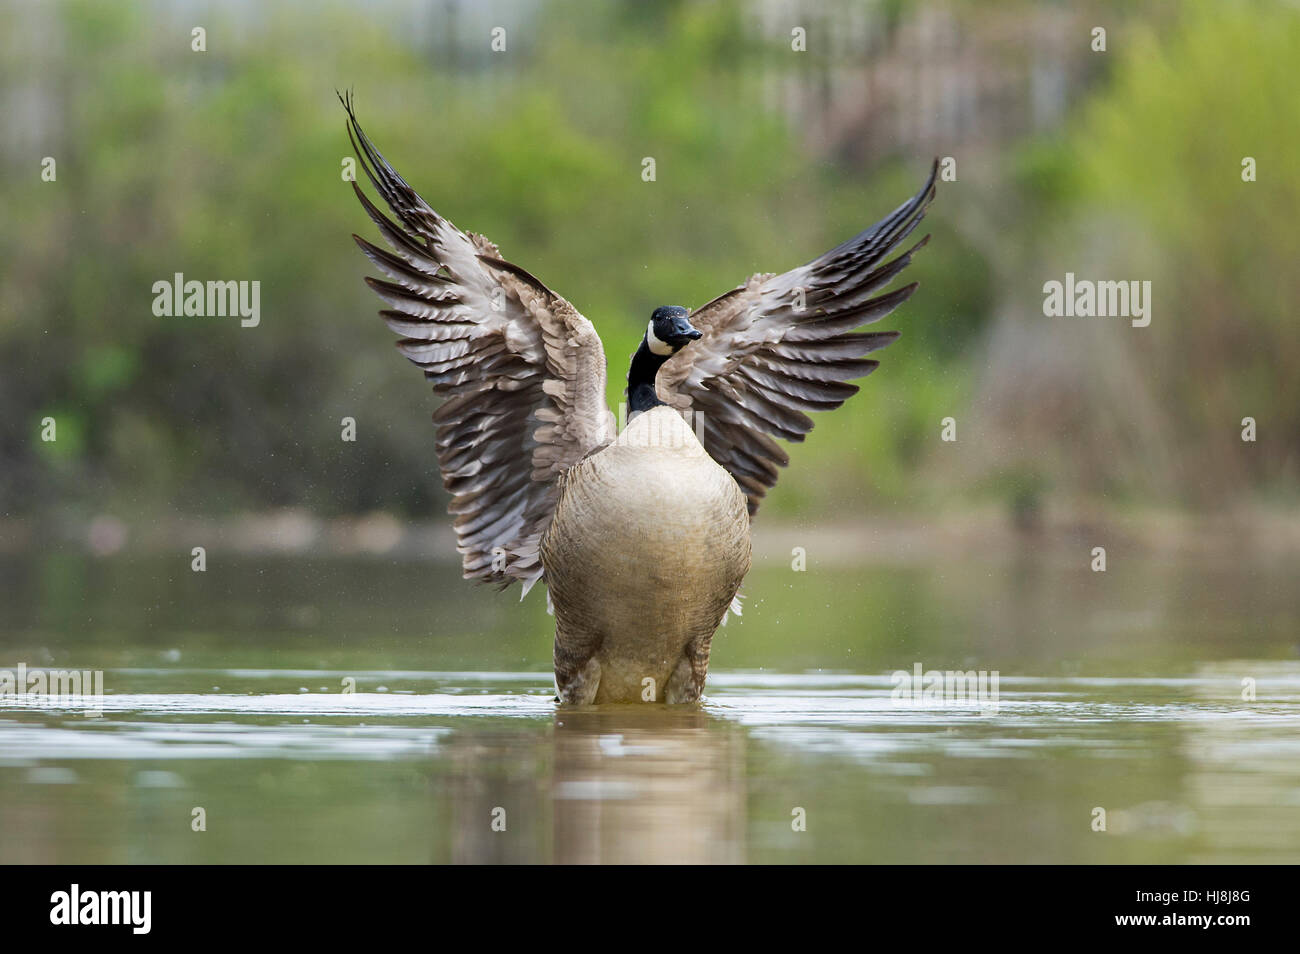 A Canada Goose flaps its wings while sitting on a pond in soft overcast light. Stock Photo